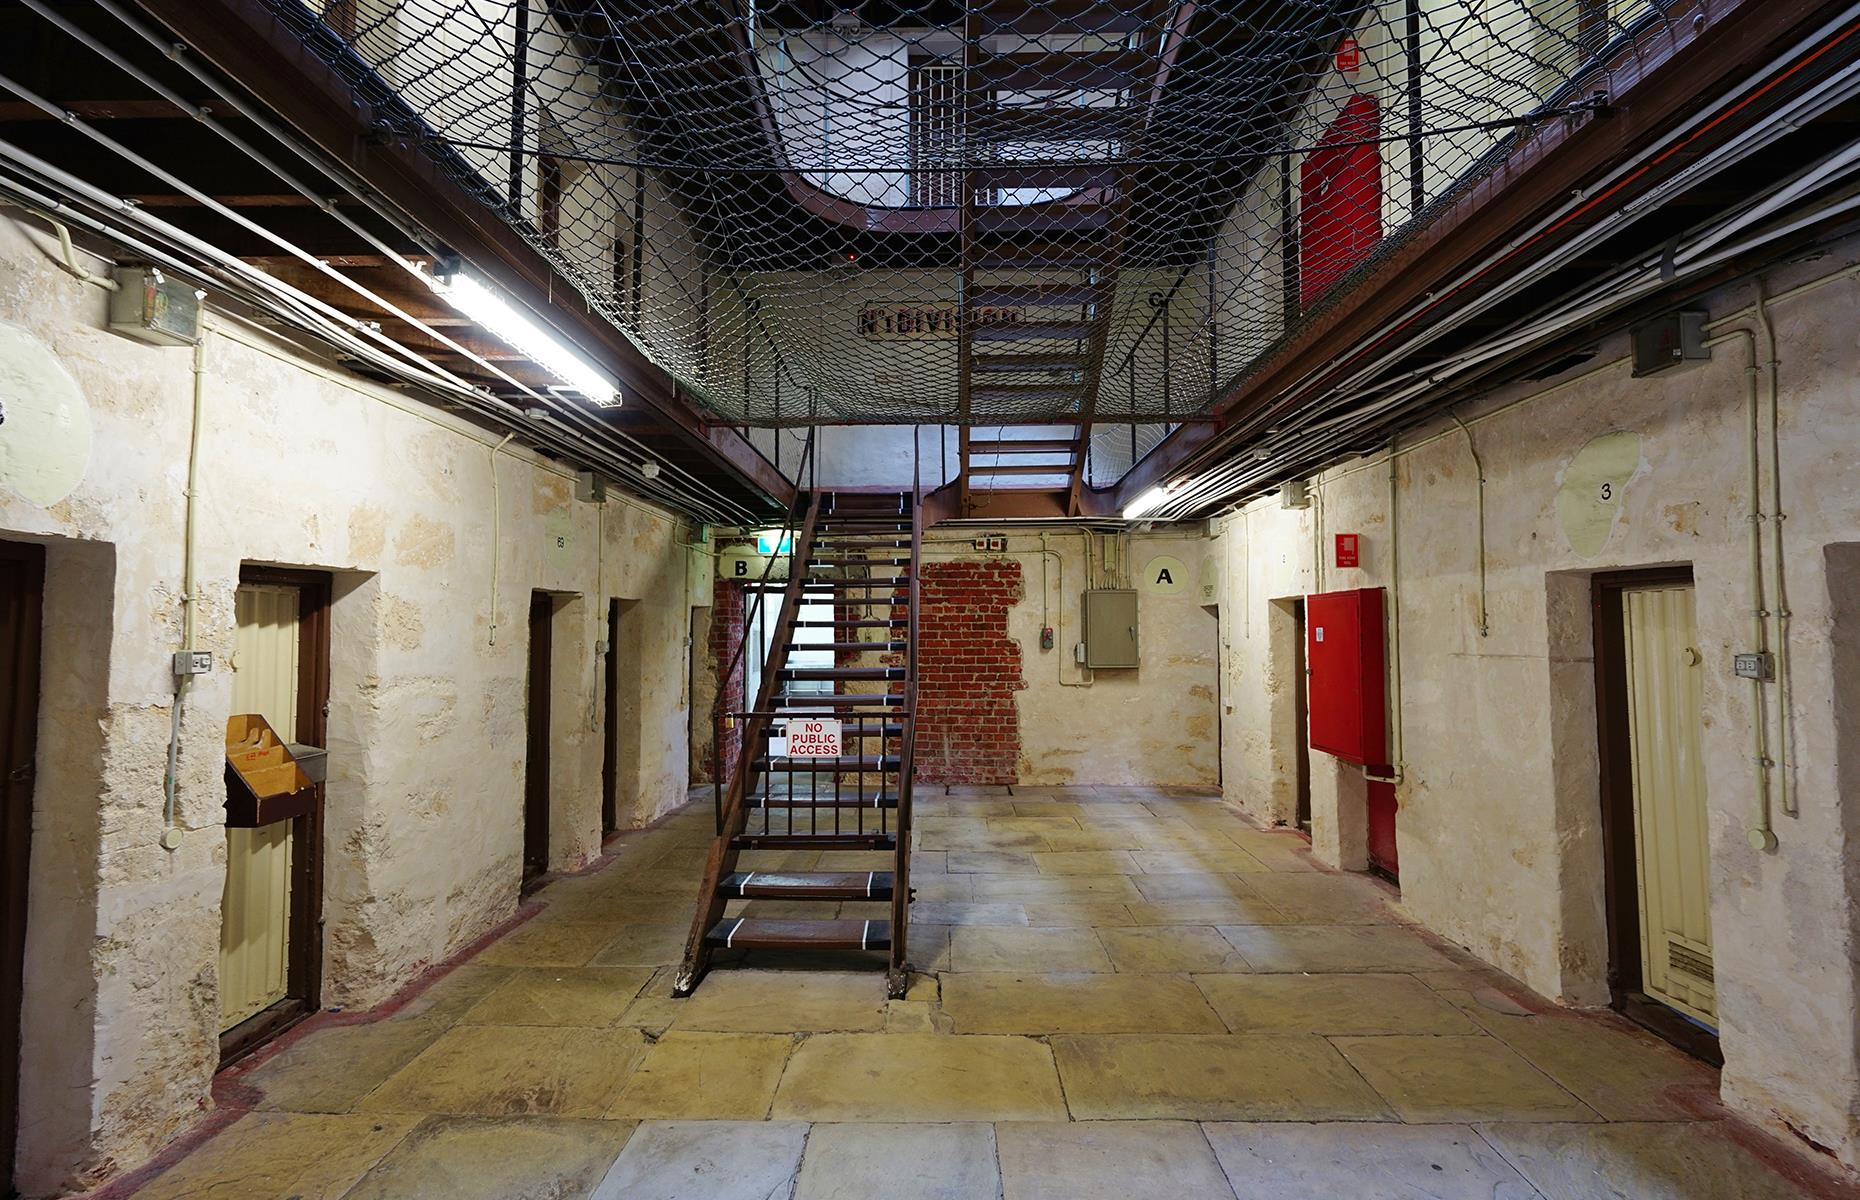 <p>A prison with a 170-year history is a veritable breeding ground for ghosts. Built by convict labour, <a href="https://fremantleprison.com.au/">Fremantle Prison</a> opened in the 1850s and saw some 10,000 prisoners pass through its gates. It was decommissioned in the 1990s after a string of dangerous riots and plummeting conditions. The Torchlight Tour casts the prison in an especially creepy light, while a dive down into the maze of prisoner-built tunnels is hair-raising too.</p>  <p><strong><a href="https://www.loveexploring.com/galleries/91142/australias-most-eerie-abandoned-buildings">Check out Australia's most eerie abandoned buildings</a></strong></p>